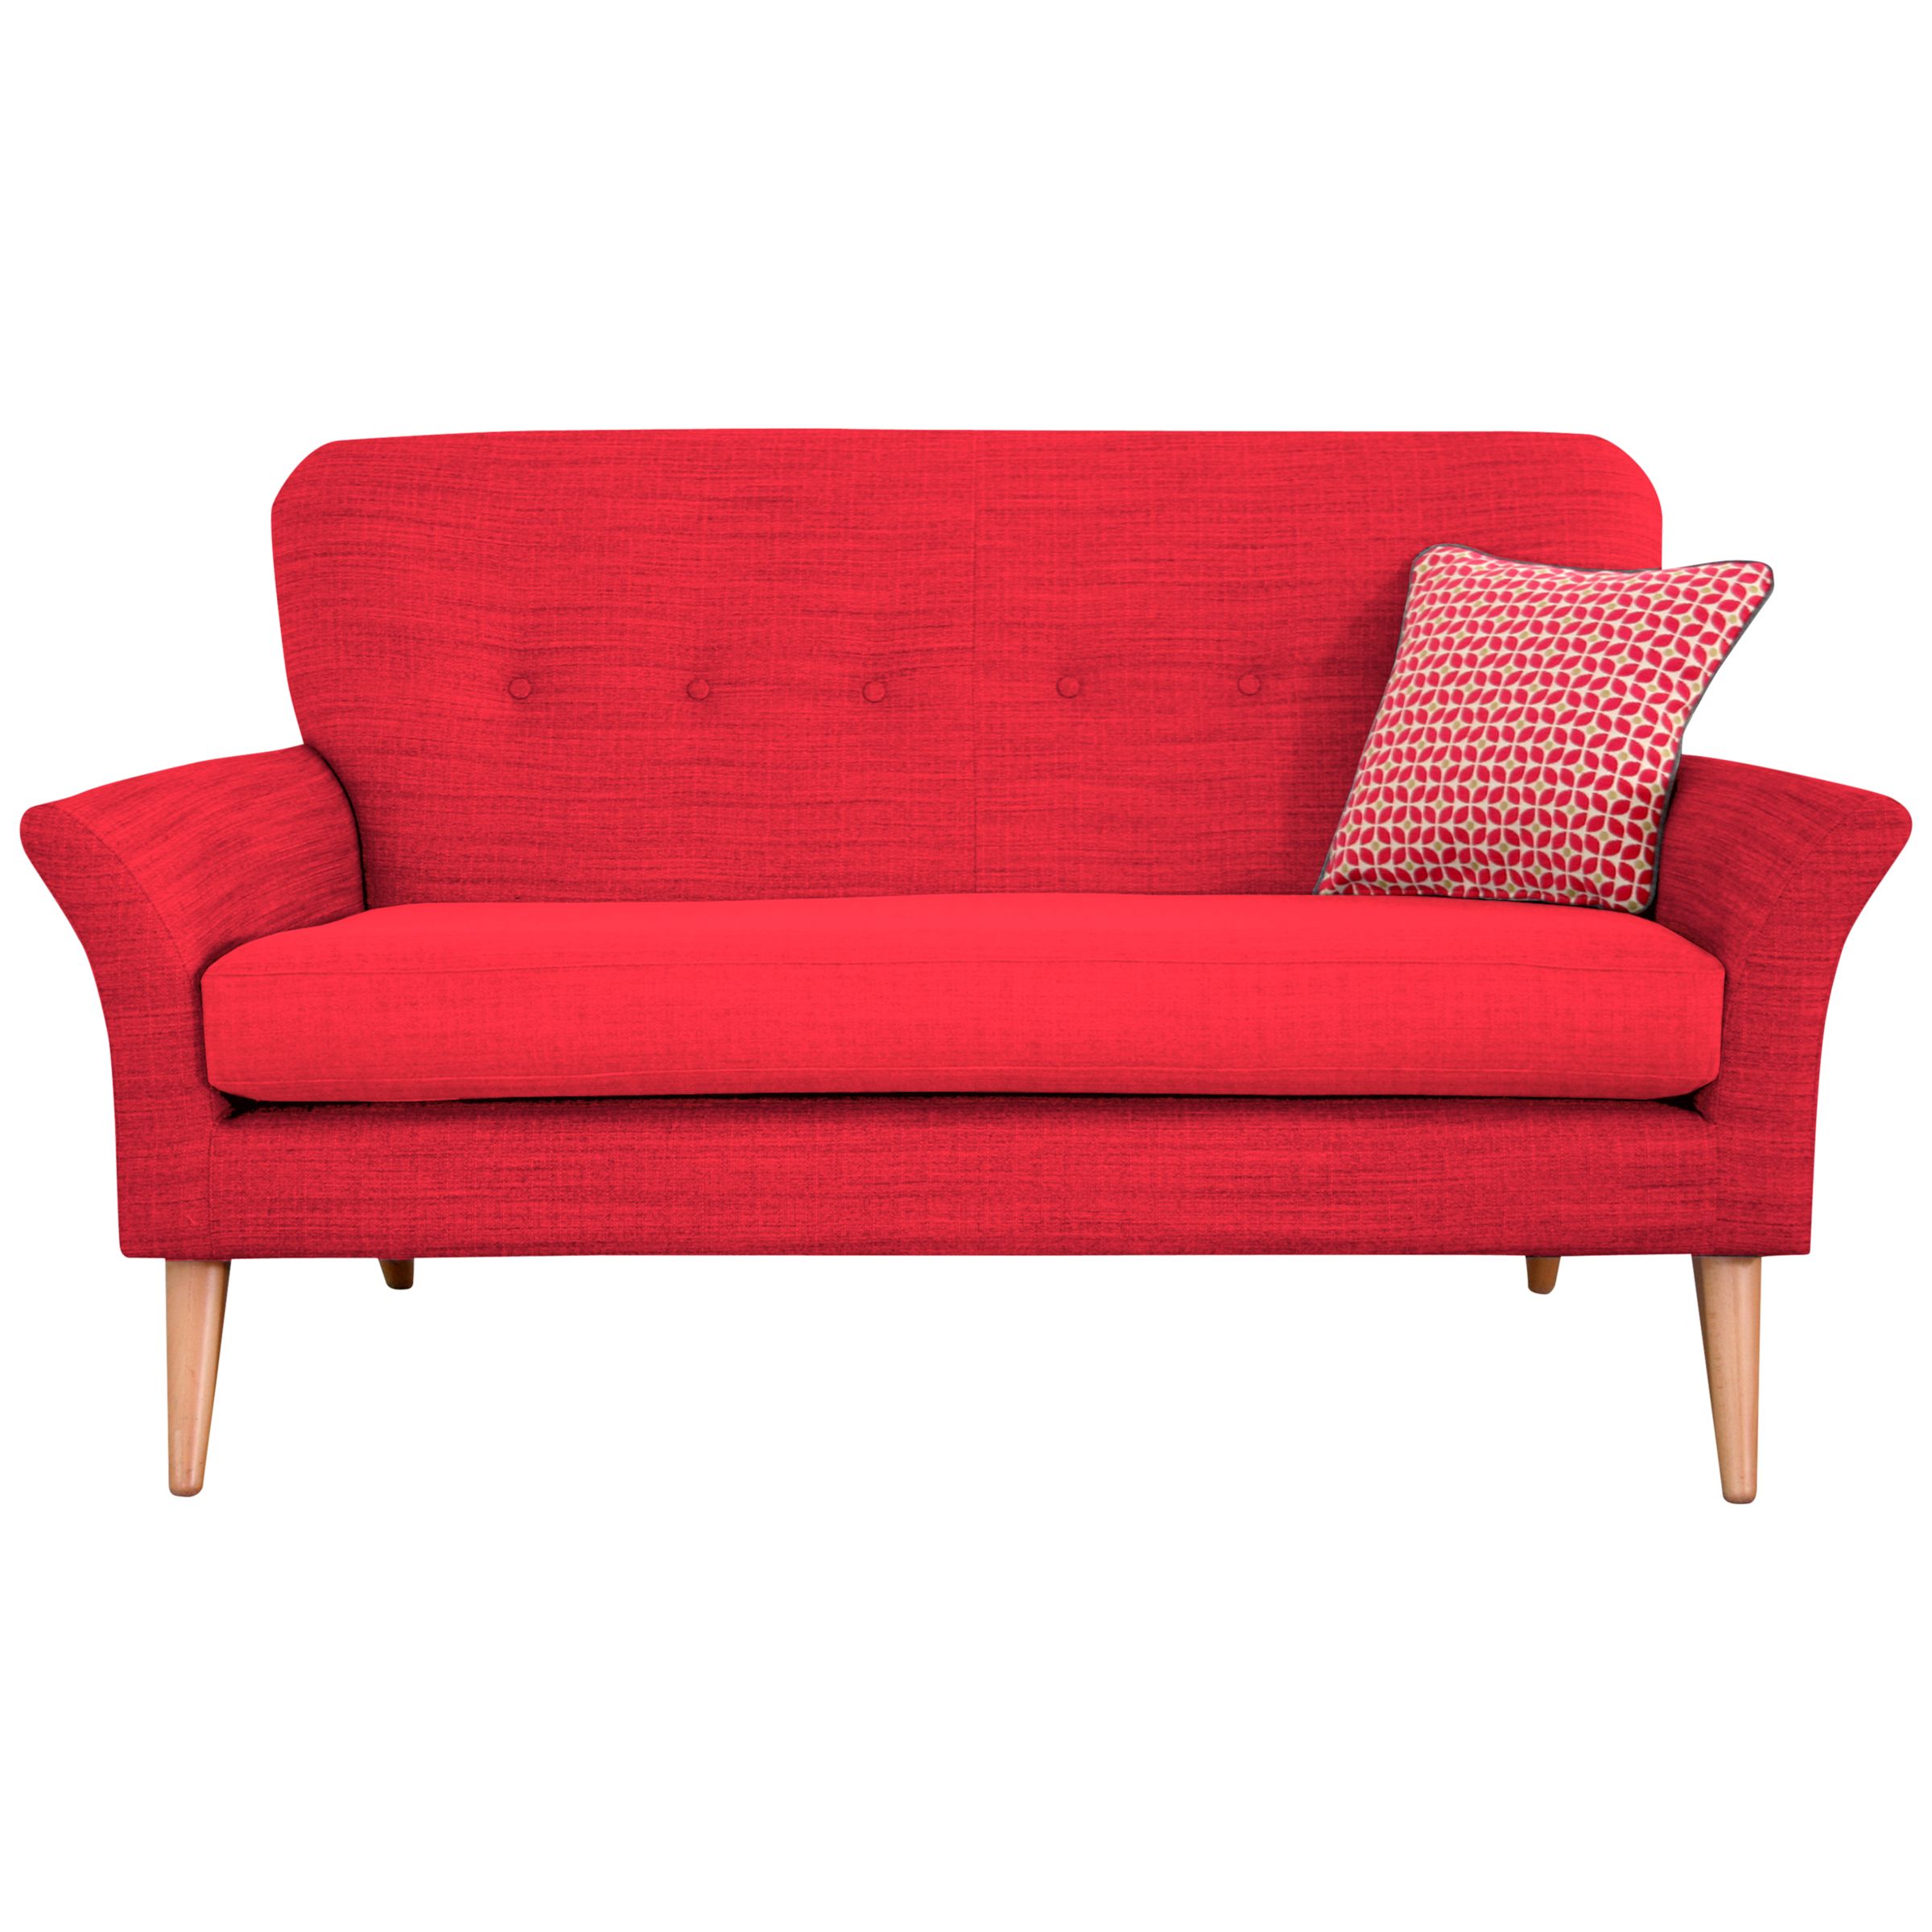 House by John Lewis Carrie Petite Sofa, Porto Red, width 149cm